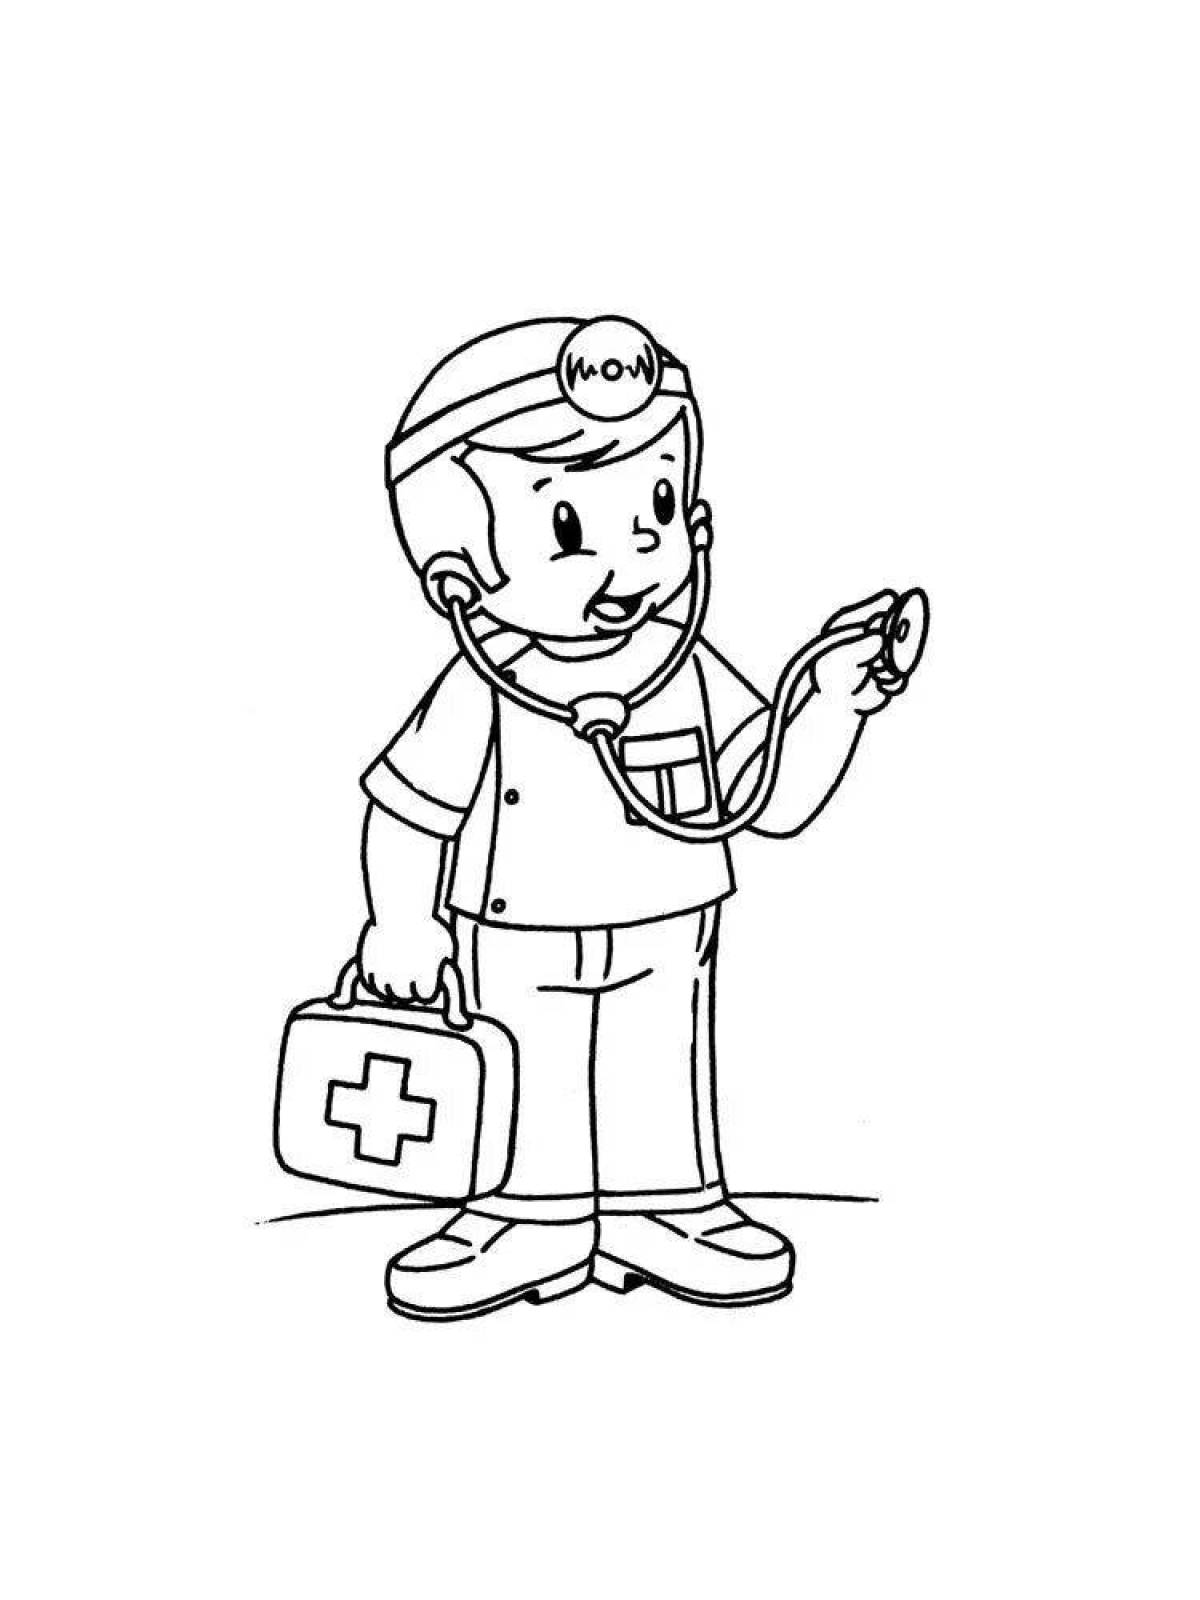 Coloring book figurine doctor with imagination